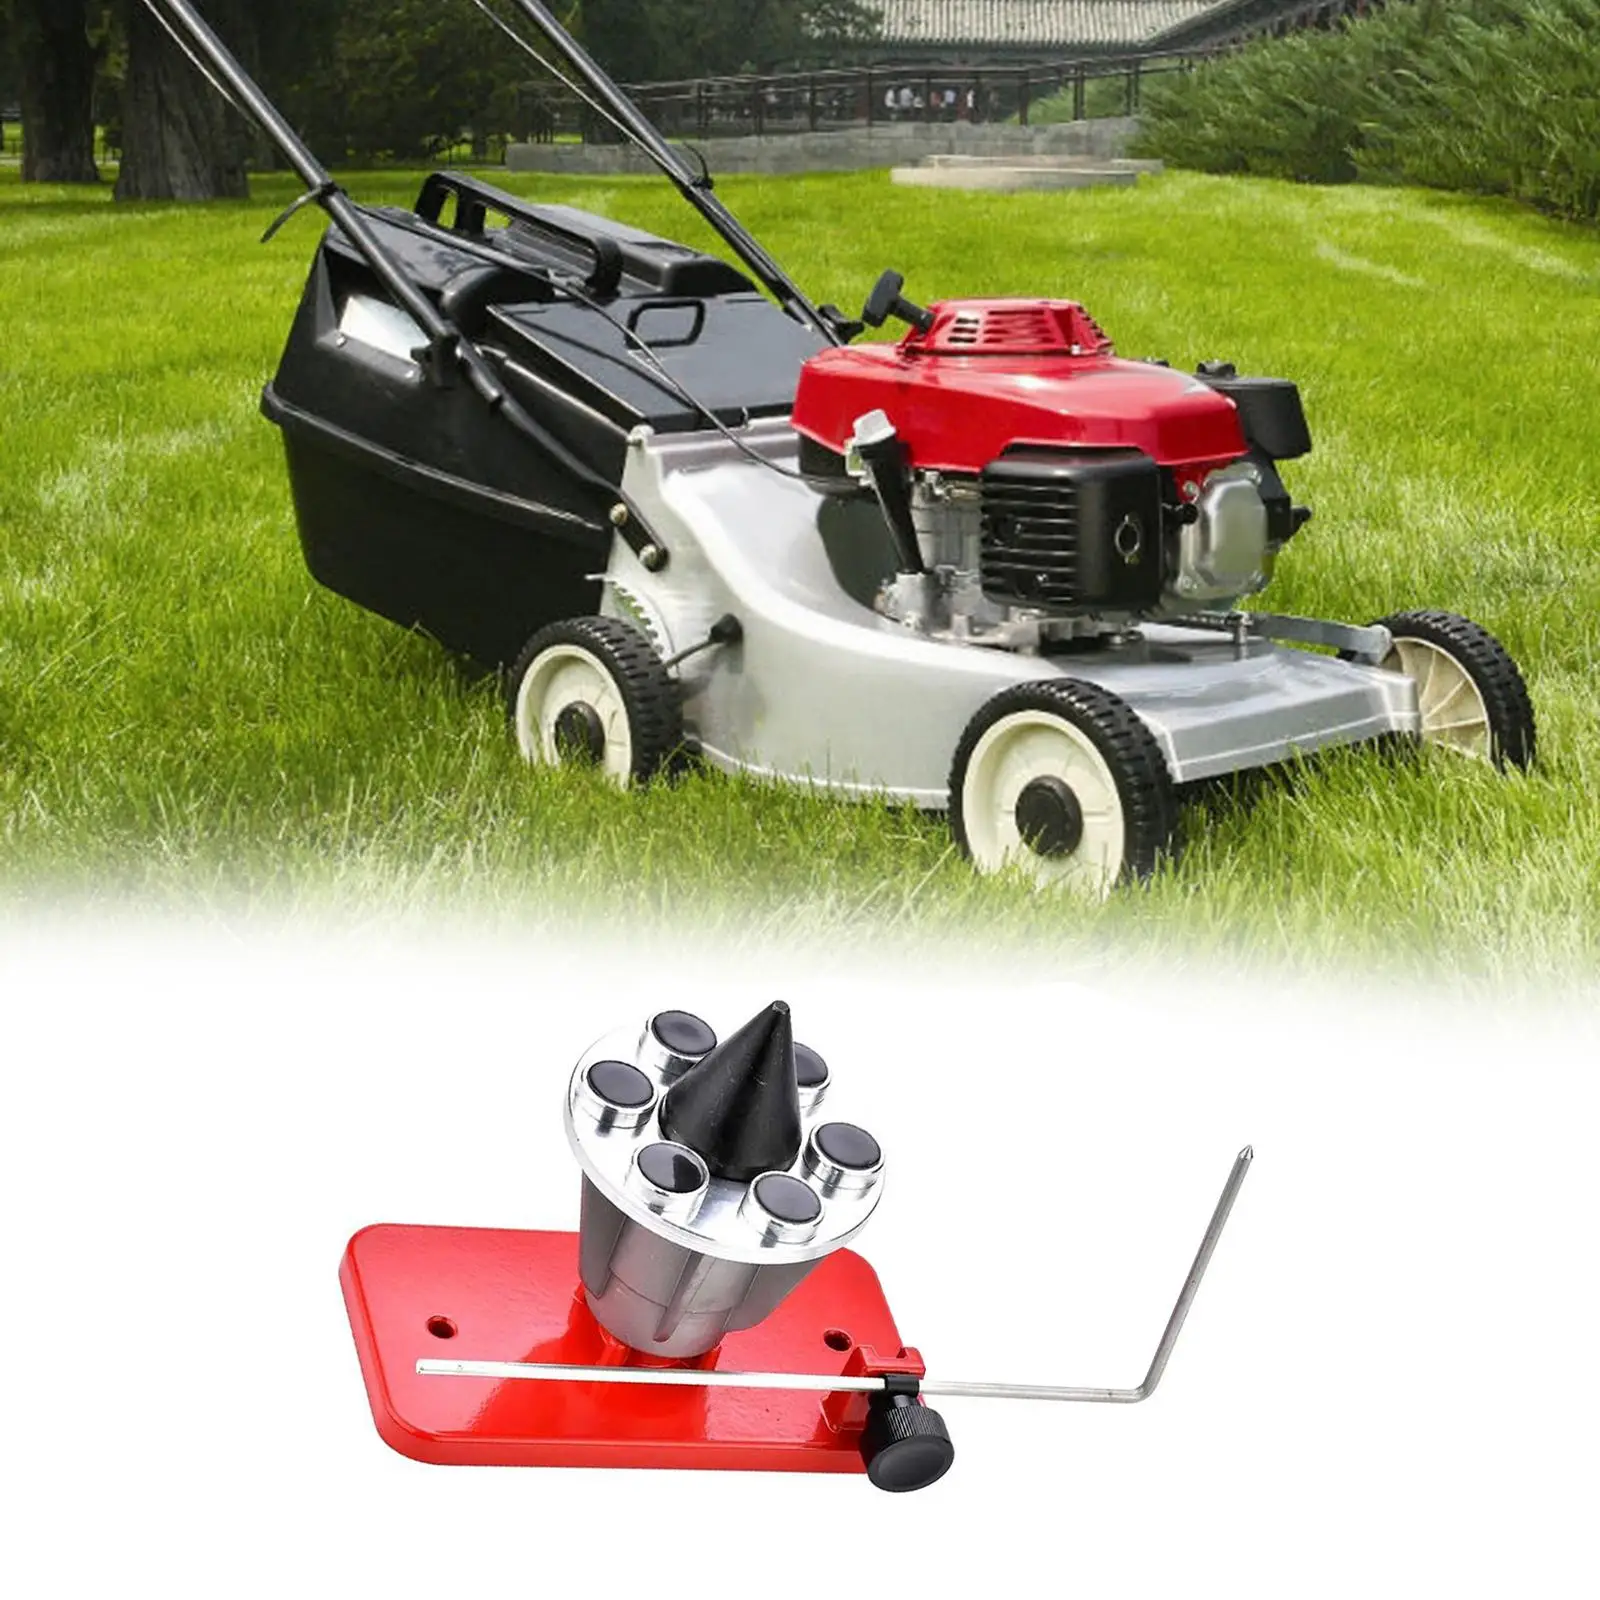 Metal Blade Balancer Reduced Vibration Durable Replace 339075B 200mm Balance Blade after Sharpening for Lawn Mower Supplies